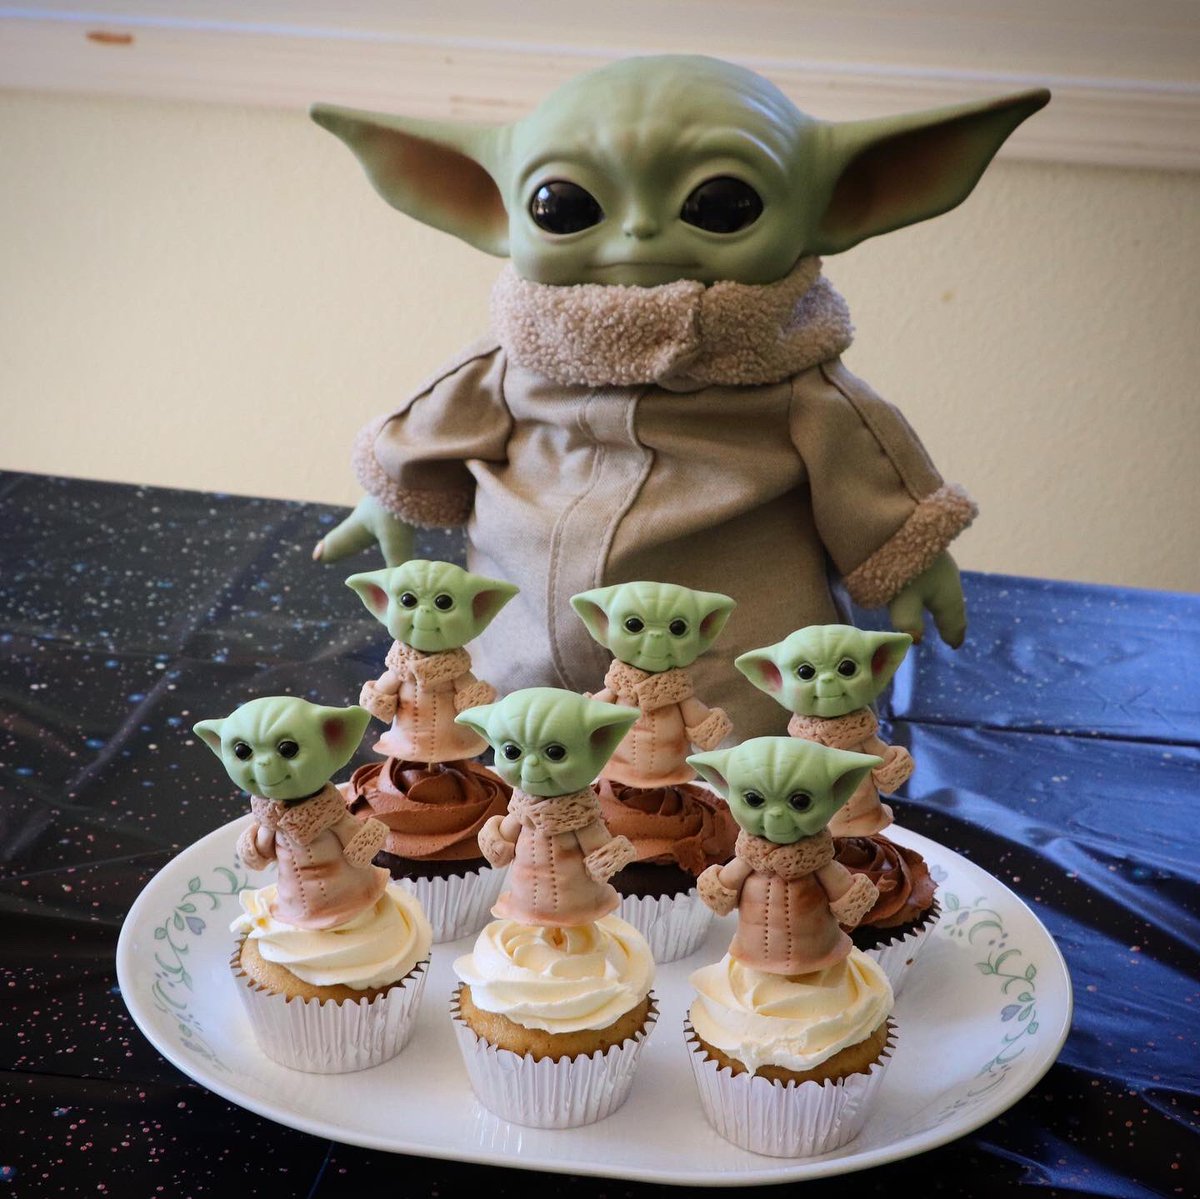 #yoda #babyyoda #mandalorian #starwars #cupcake #cupcaketopper #localbusiness #handmade #cakedecorating #cakedesign #challenge #proud #imadeit #birthdaycake #forhim #sunday There are a lot waiting to share. Each yoda has different face impression, individually made by me 💪